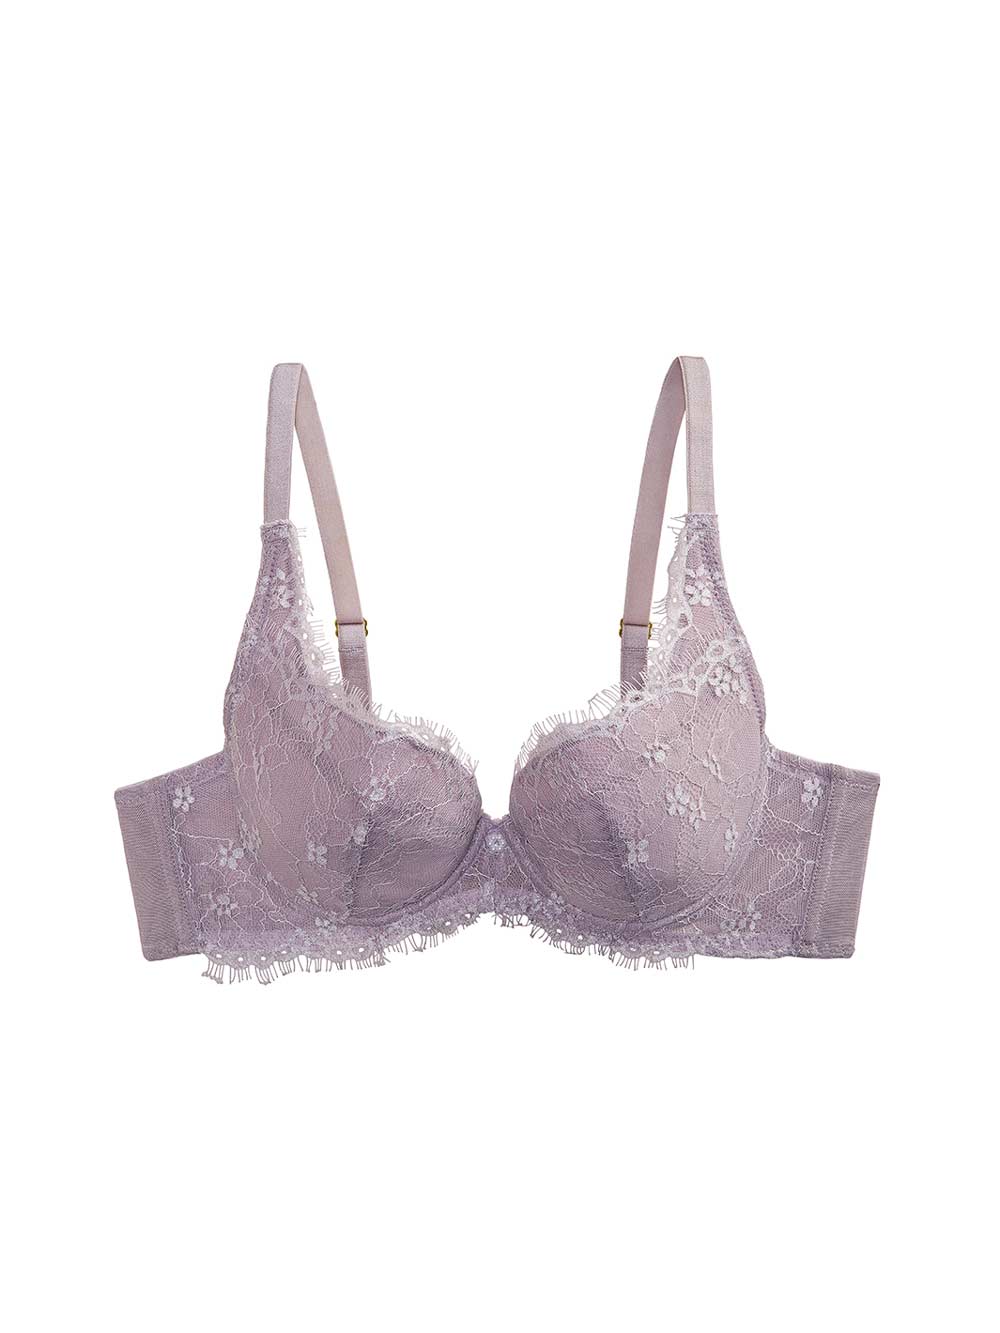 Ethel Bra - Wysteria, front view product image